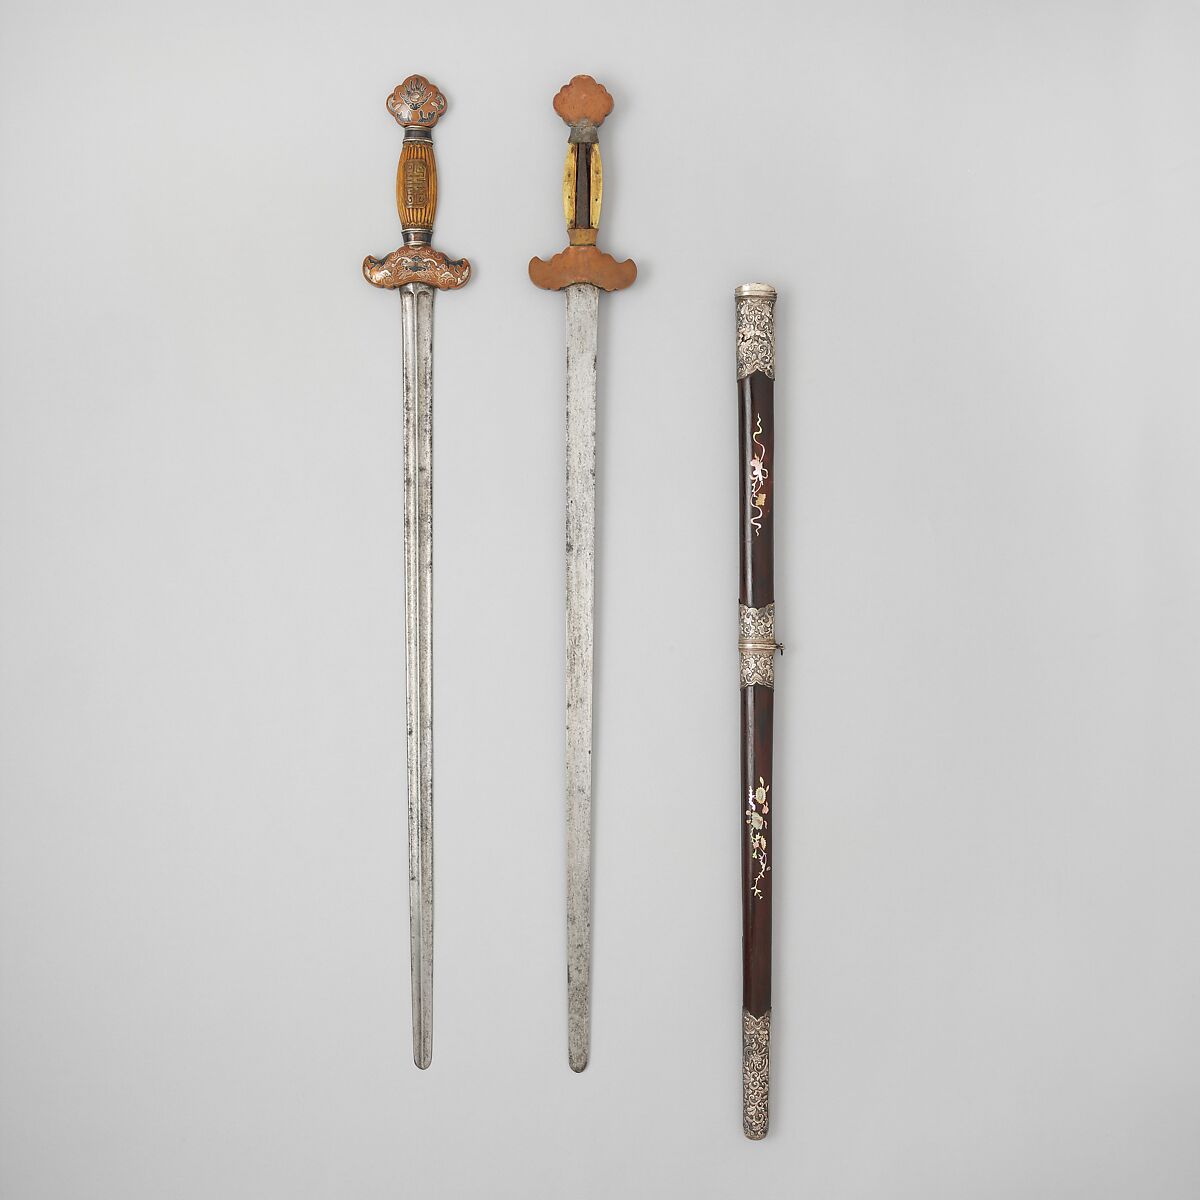 Double Sword with Scabbard, Steel, ivory, wood, mother-of-pearl, copper, silver, Vietnamese 